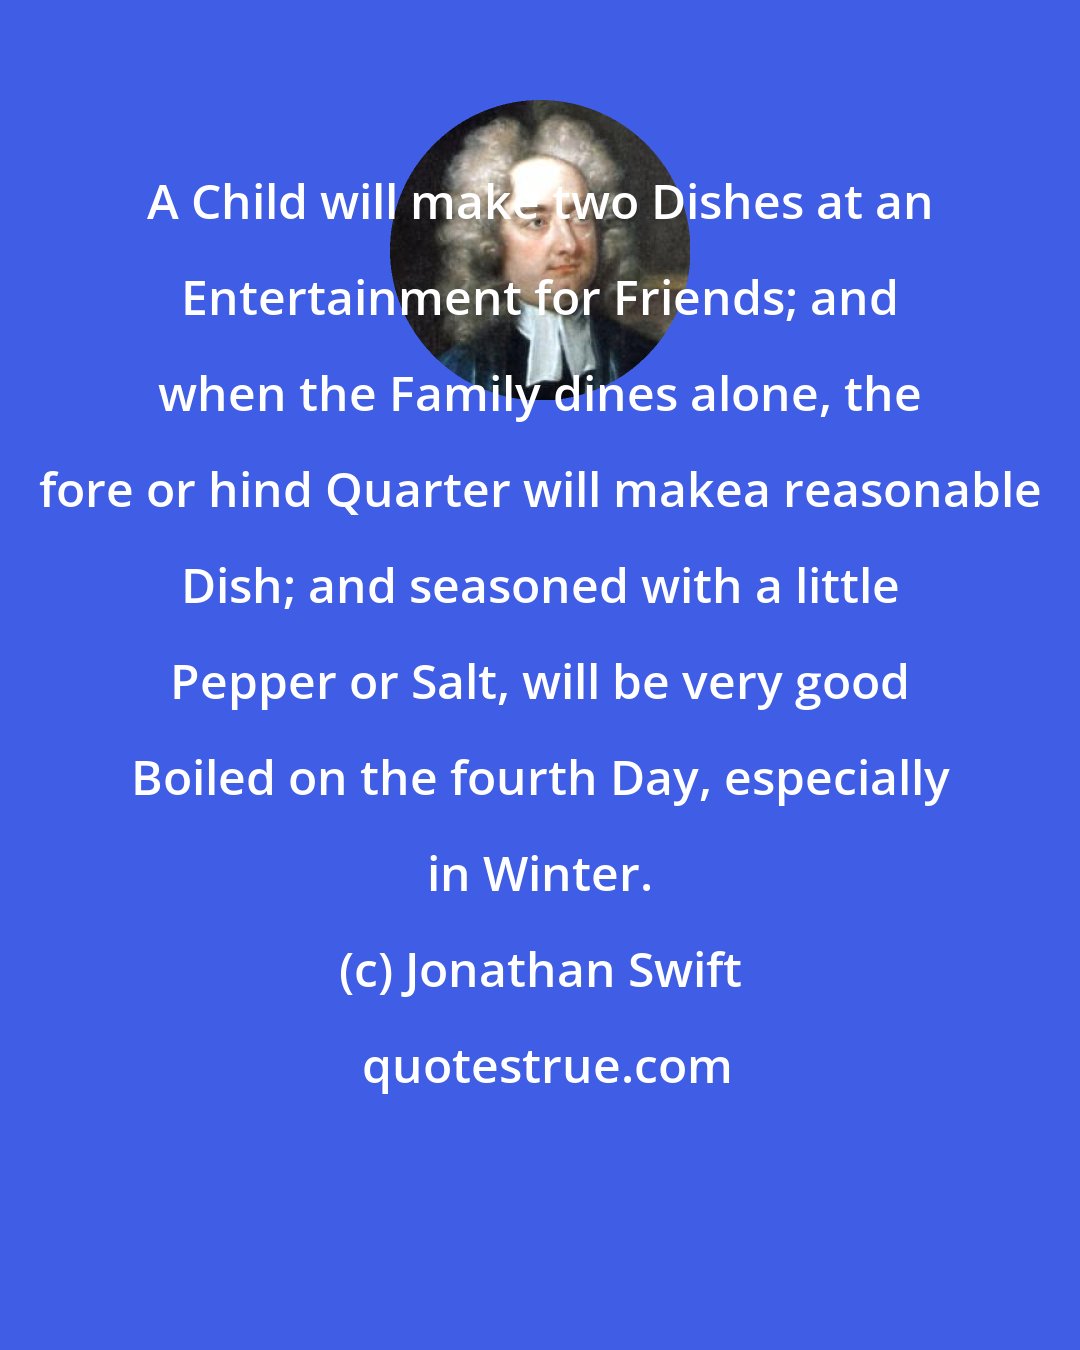 Jonathan Swift: A Child will make two Dishes at an Entertainment for Friends; and when the Family dines alone, the fore or hind Quarter will makea reasonable Dish; and seasoned with a little Pepper or Salt, will be very good Boiled on the fourth Day, especially in Winter.